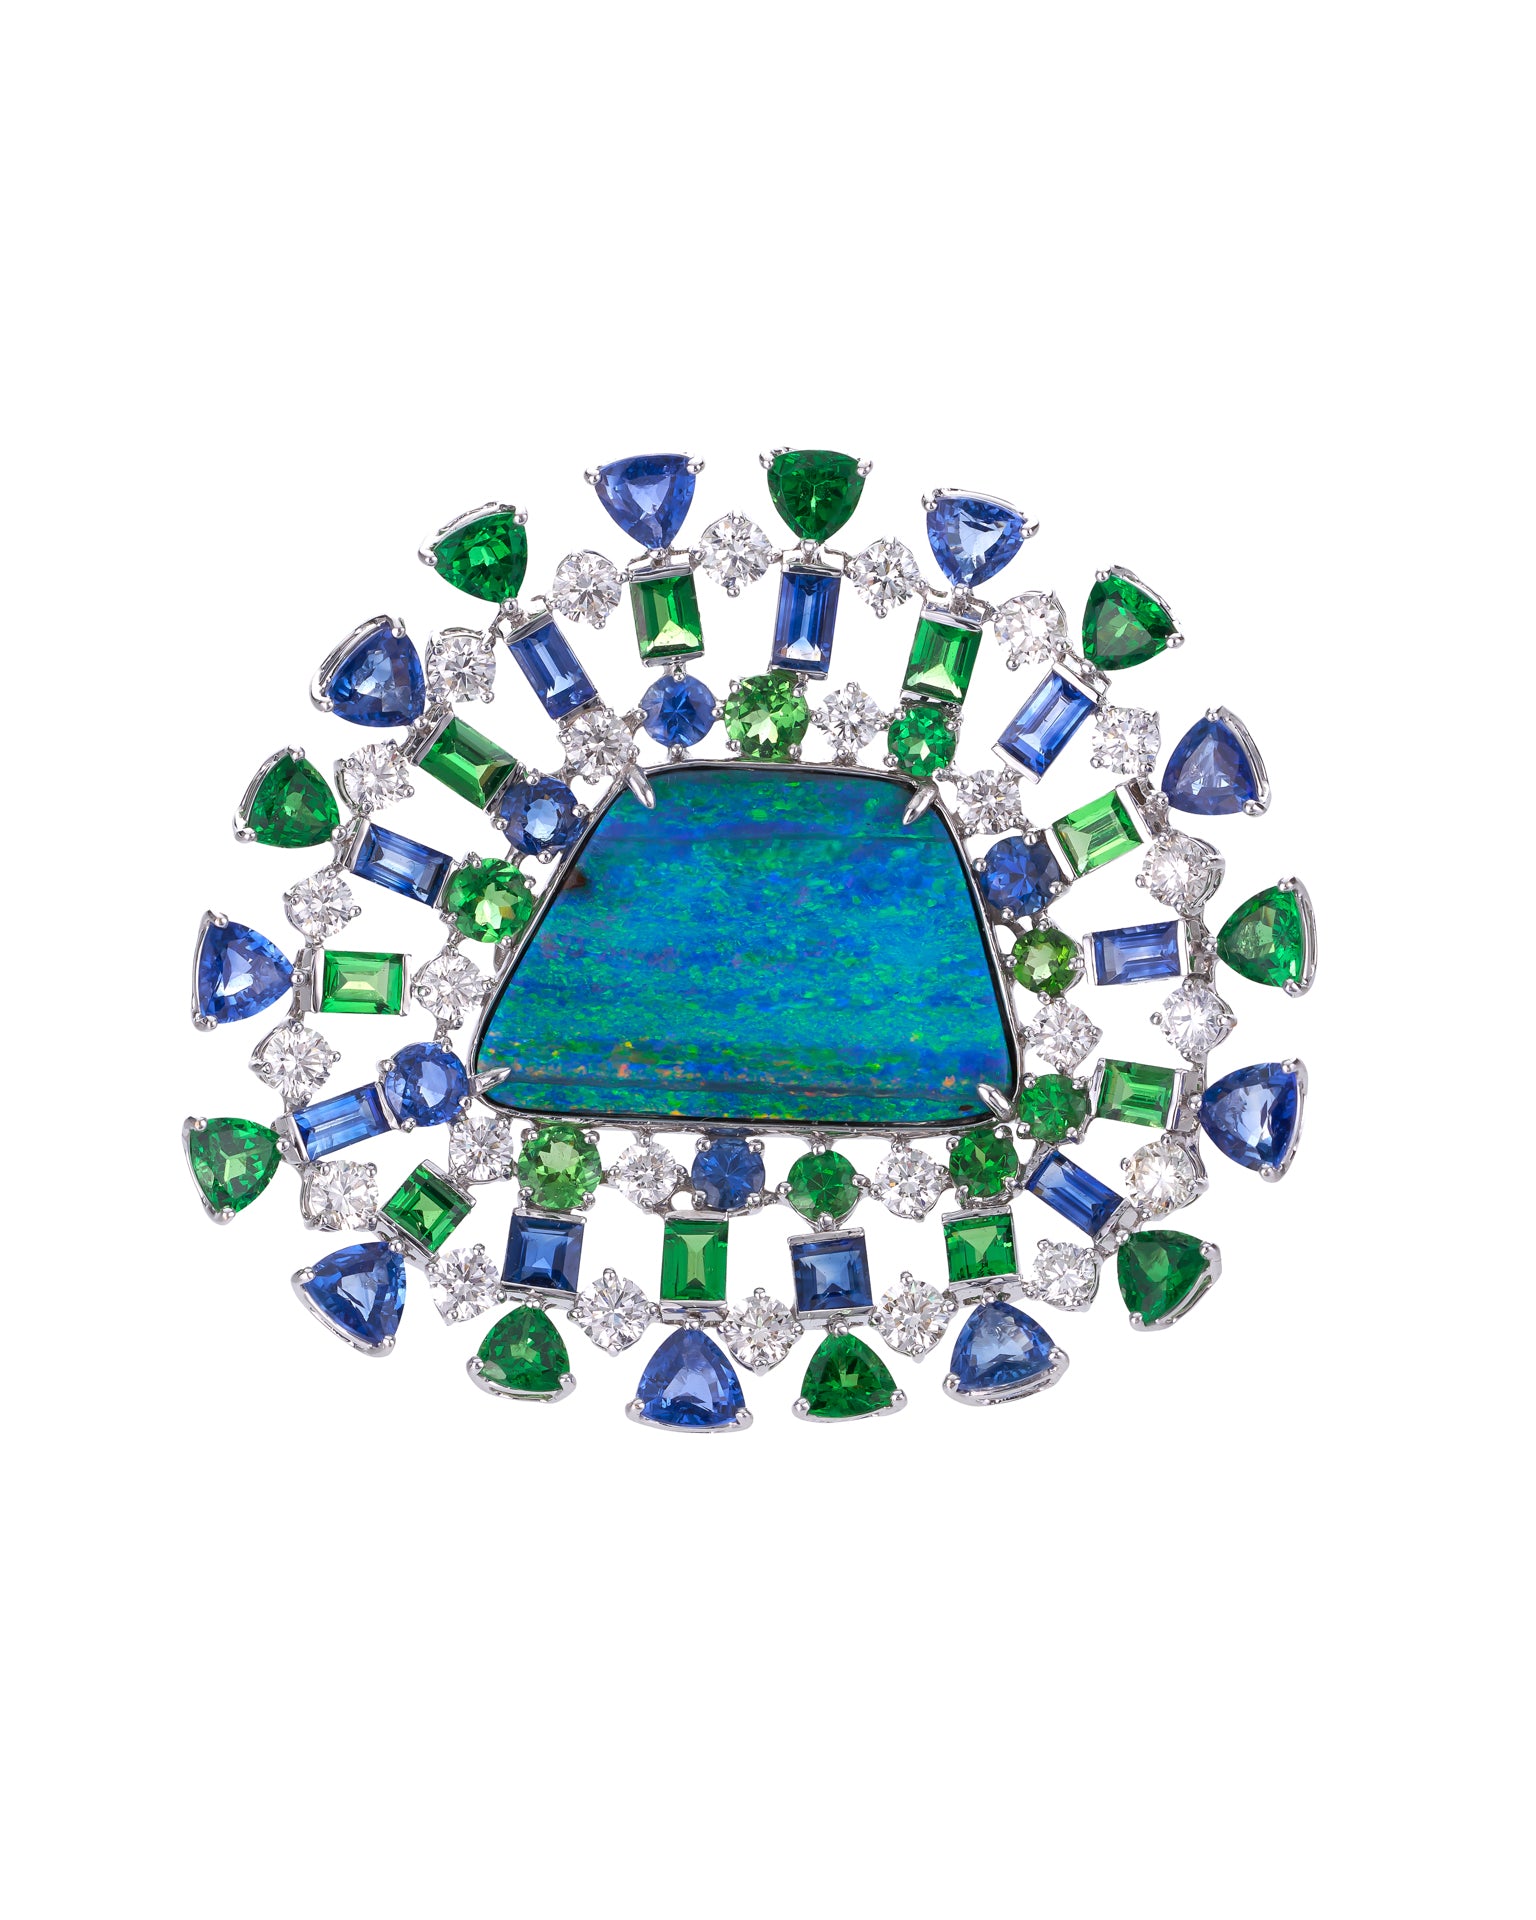 Australian Opal Mauritius Ring surrounded by diamonds, sapphires and tsavorite, crafted in 18 karat white gold